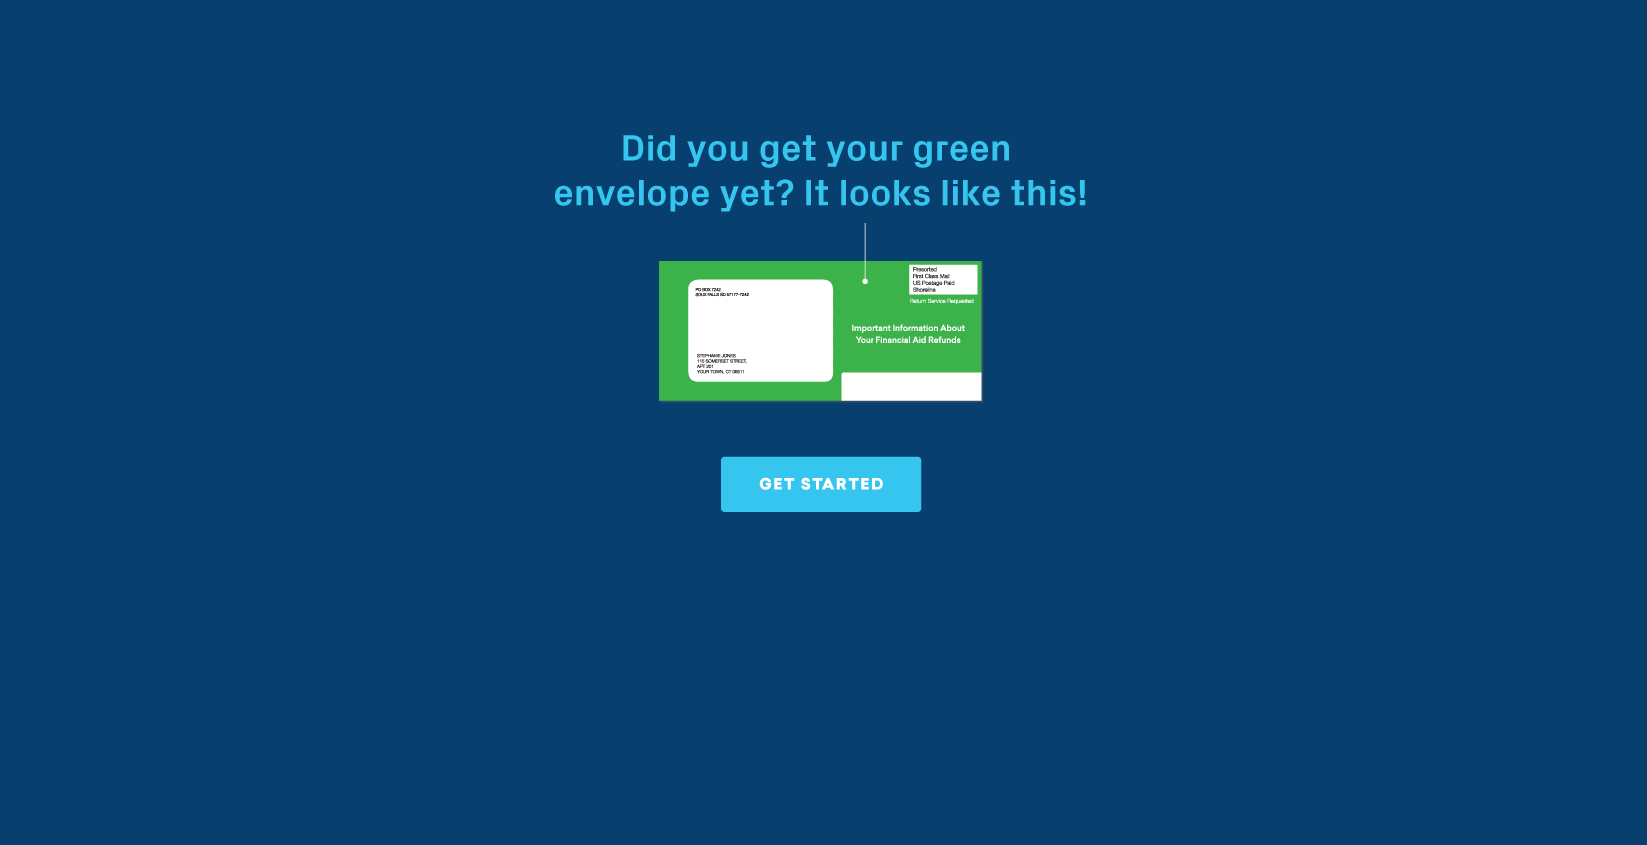 Your green envelope from BankMobile contains your personal code.